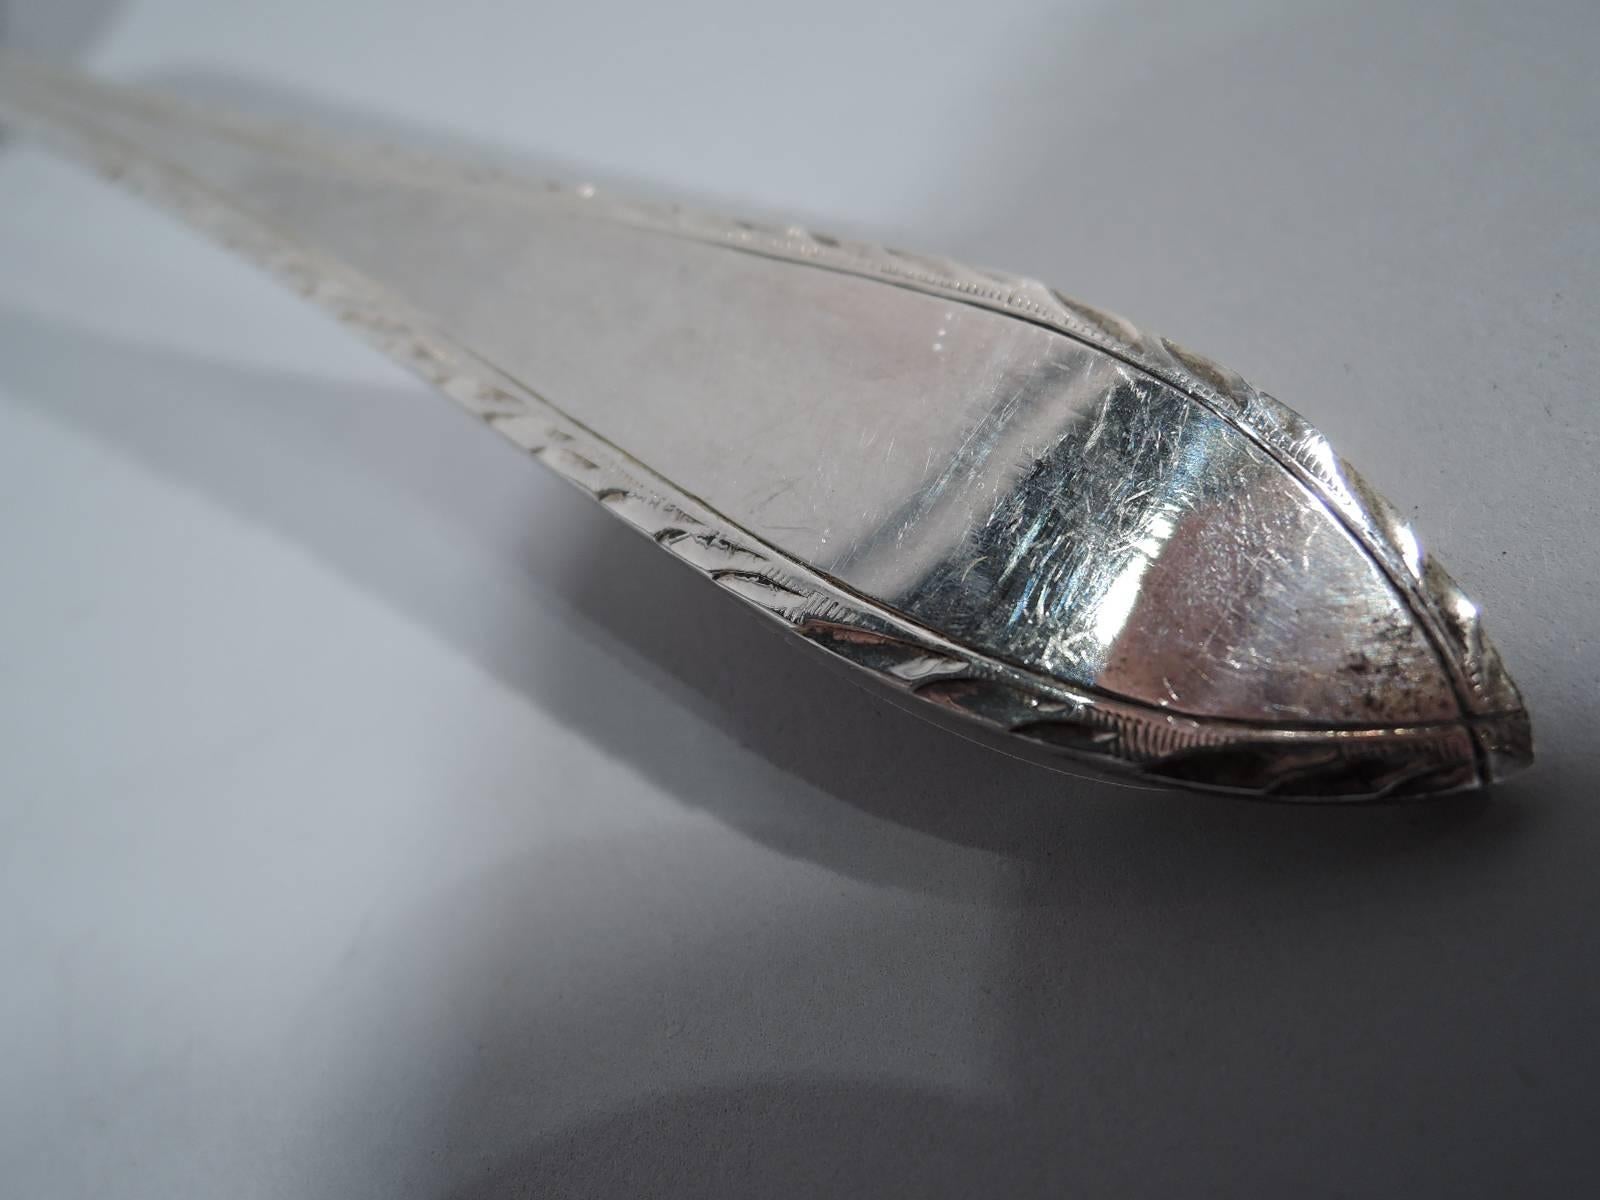 Antique sterling silver serving spoon in Feather Edge pattern. Made by Tiffany & Co. in New York. The spoon has a large oval bowl. A Fine piece in this pattern, which was first produced in 1901. Hallmark includes director’s letter m (1907-1947).